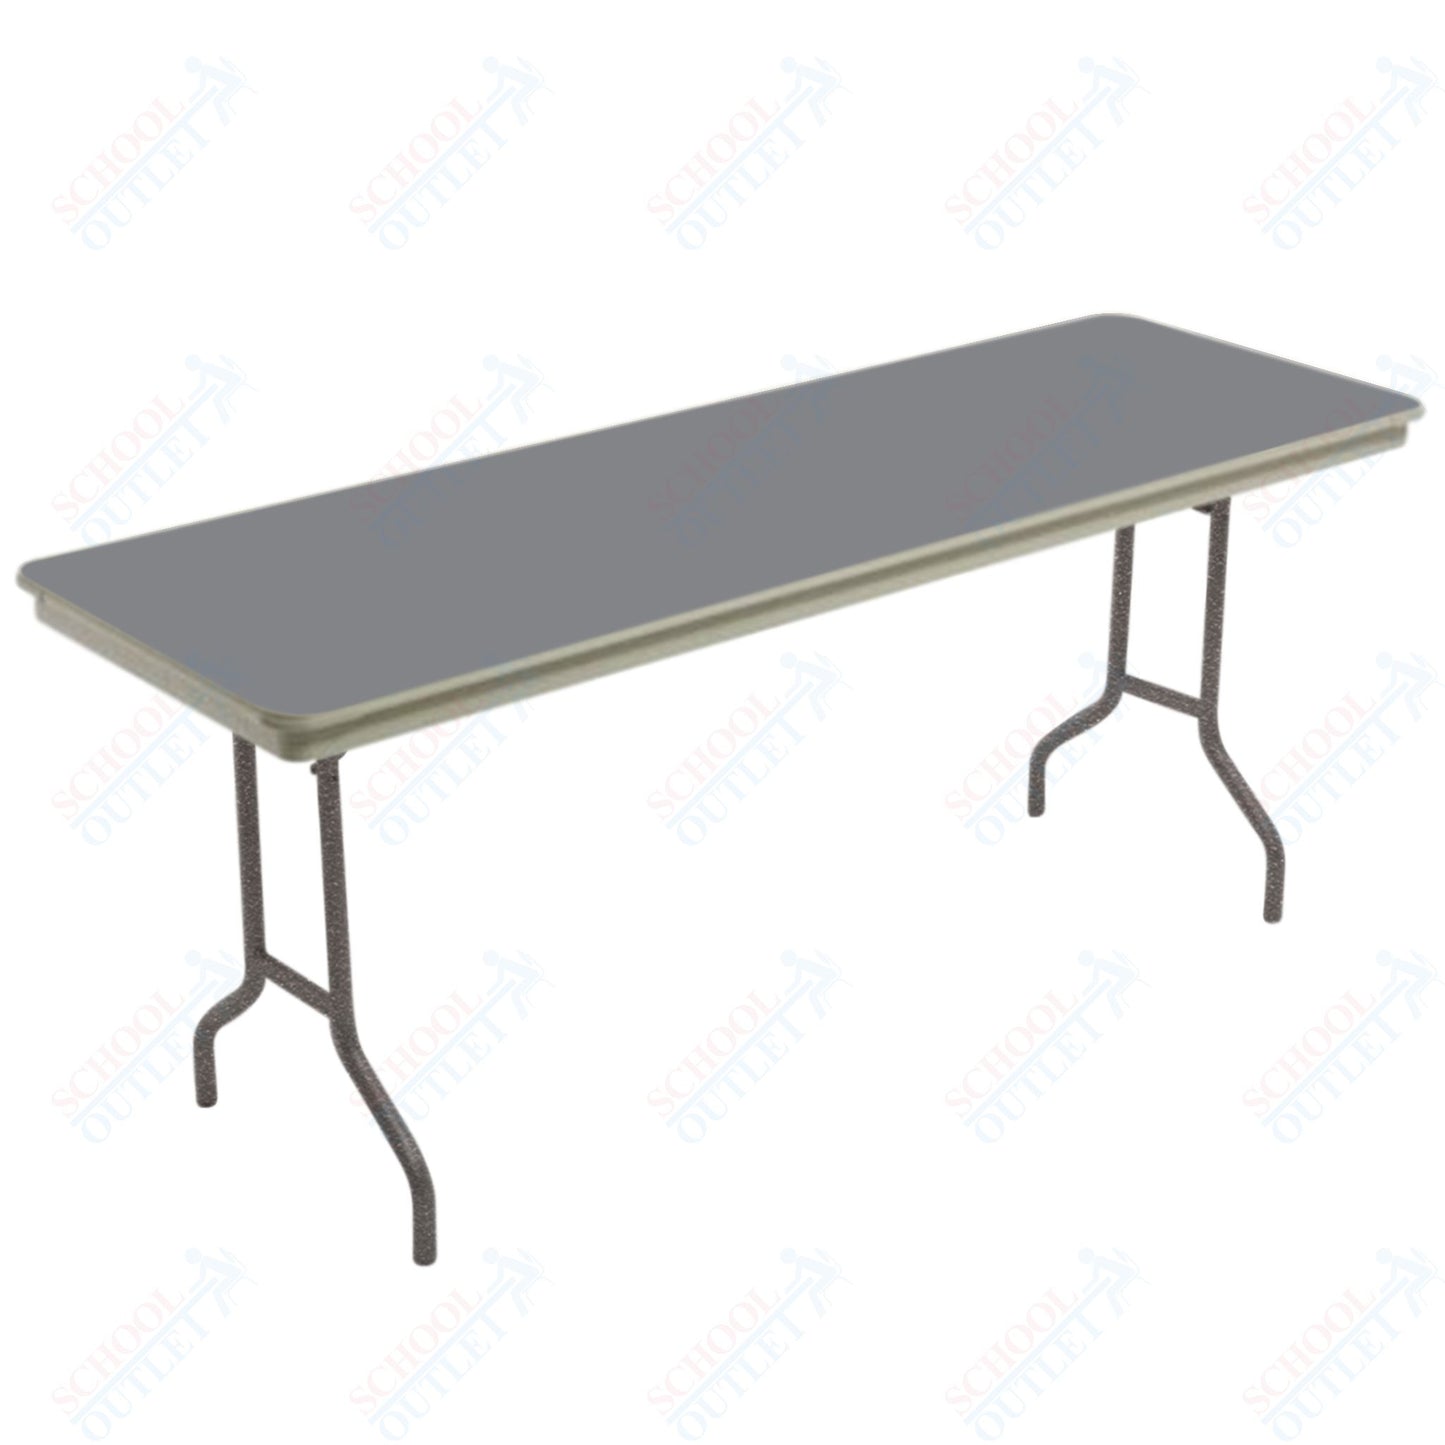 AmTab Dynalite Featherweight Heavy-Duty ABS Plastic Folding Table - Rectangle - 18"W x 60"L x 29"H (AmTab AMT-185DL) - SchoolOutlet